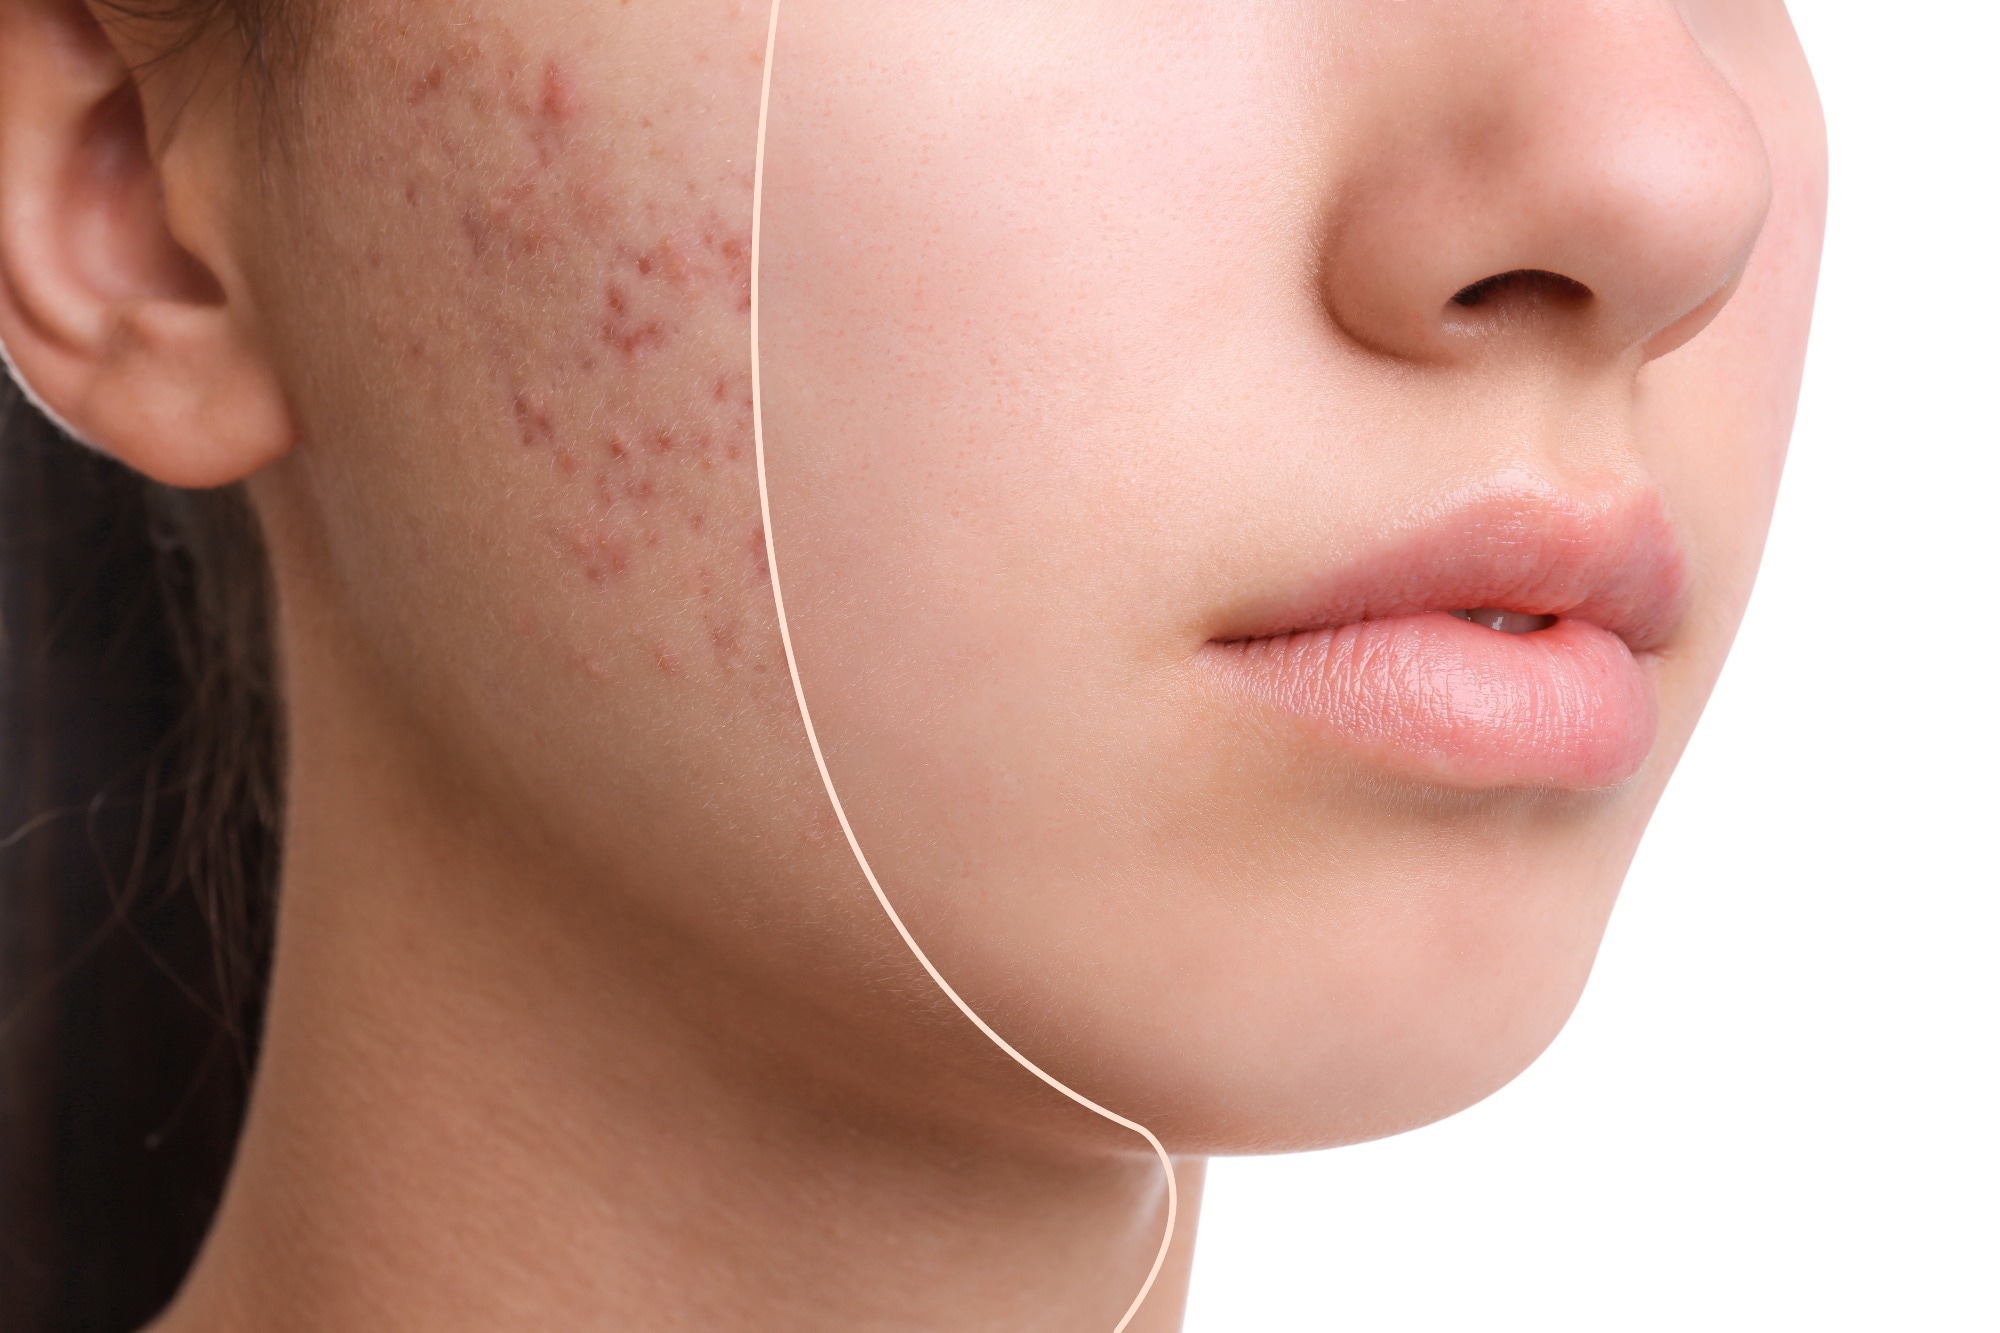 Distinctive plant extract combination has potent anti-acne results